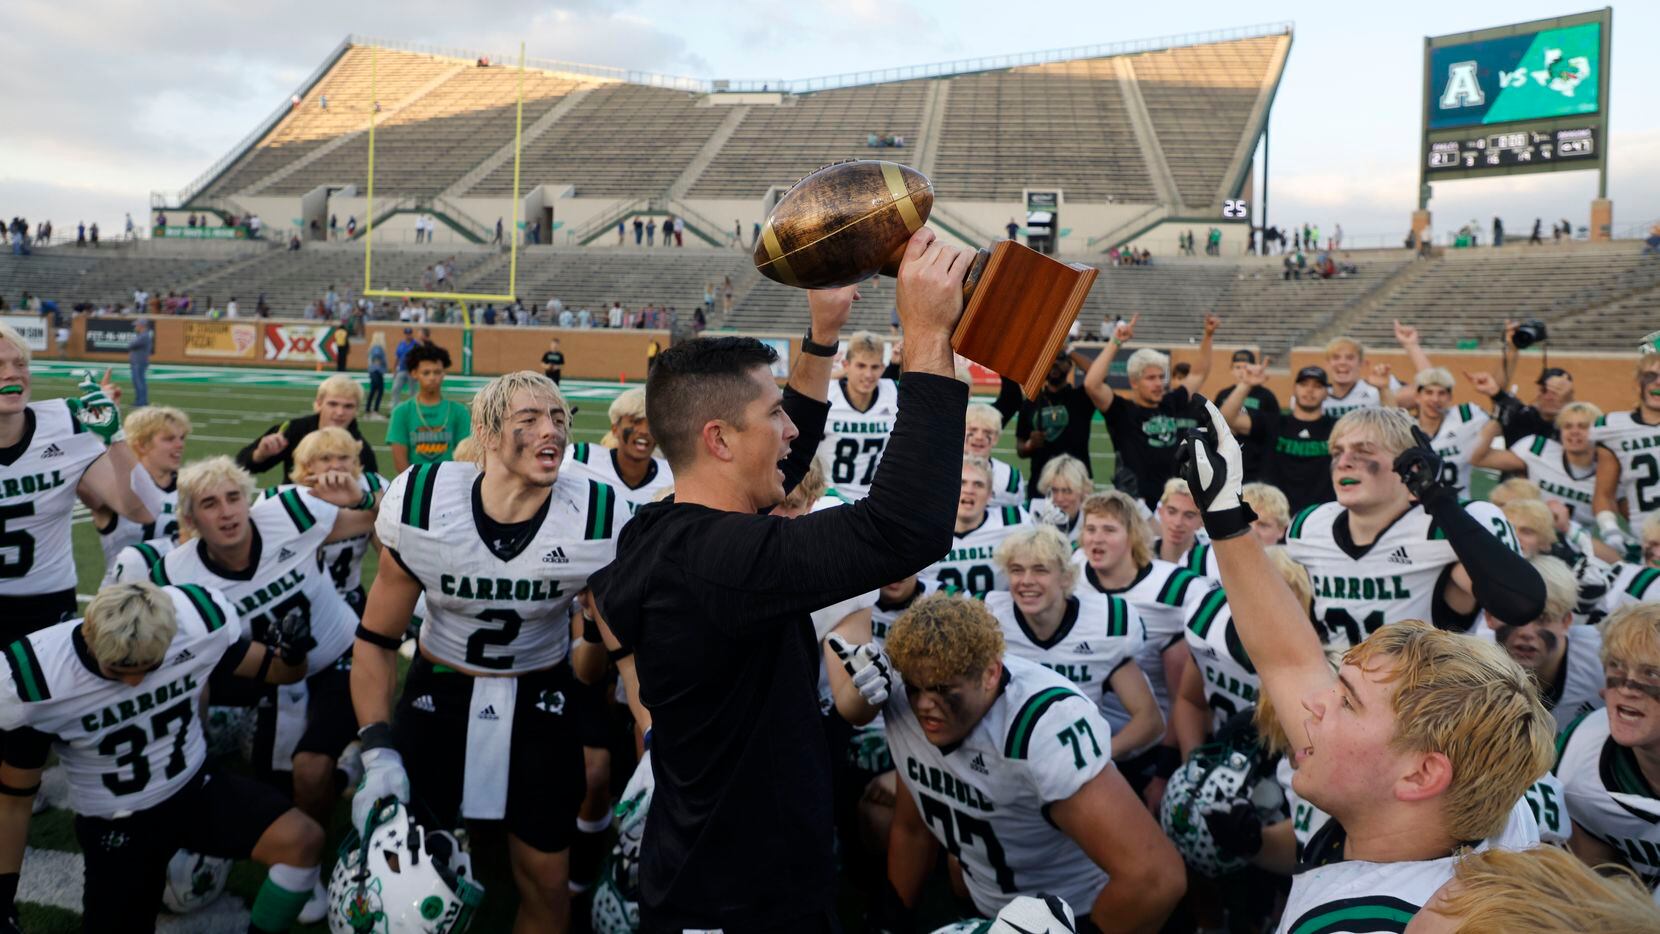 Southlake head coach Riley Dodge holds up the Region I trophy after they defeated Allen 47-21 during a Class 6A Division I Region I final high school football game in Denton, Texas on Saturday, Dec. 4, 2021. (Michael Ainsworth/Special Contributor)